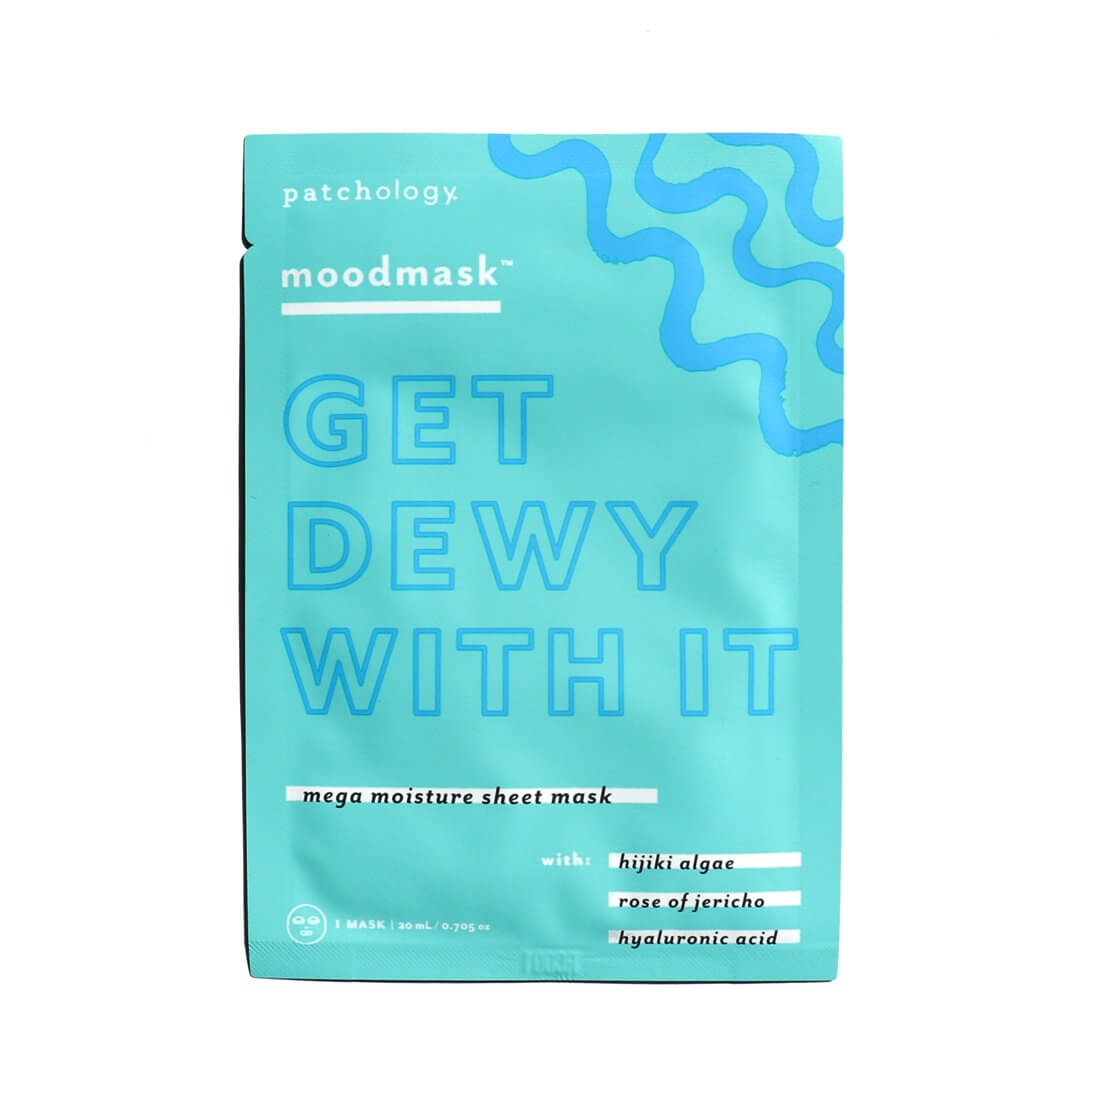 Patchology Get Dewy With it mask